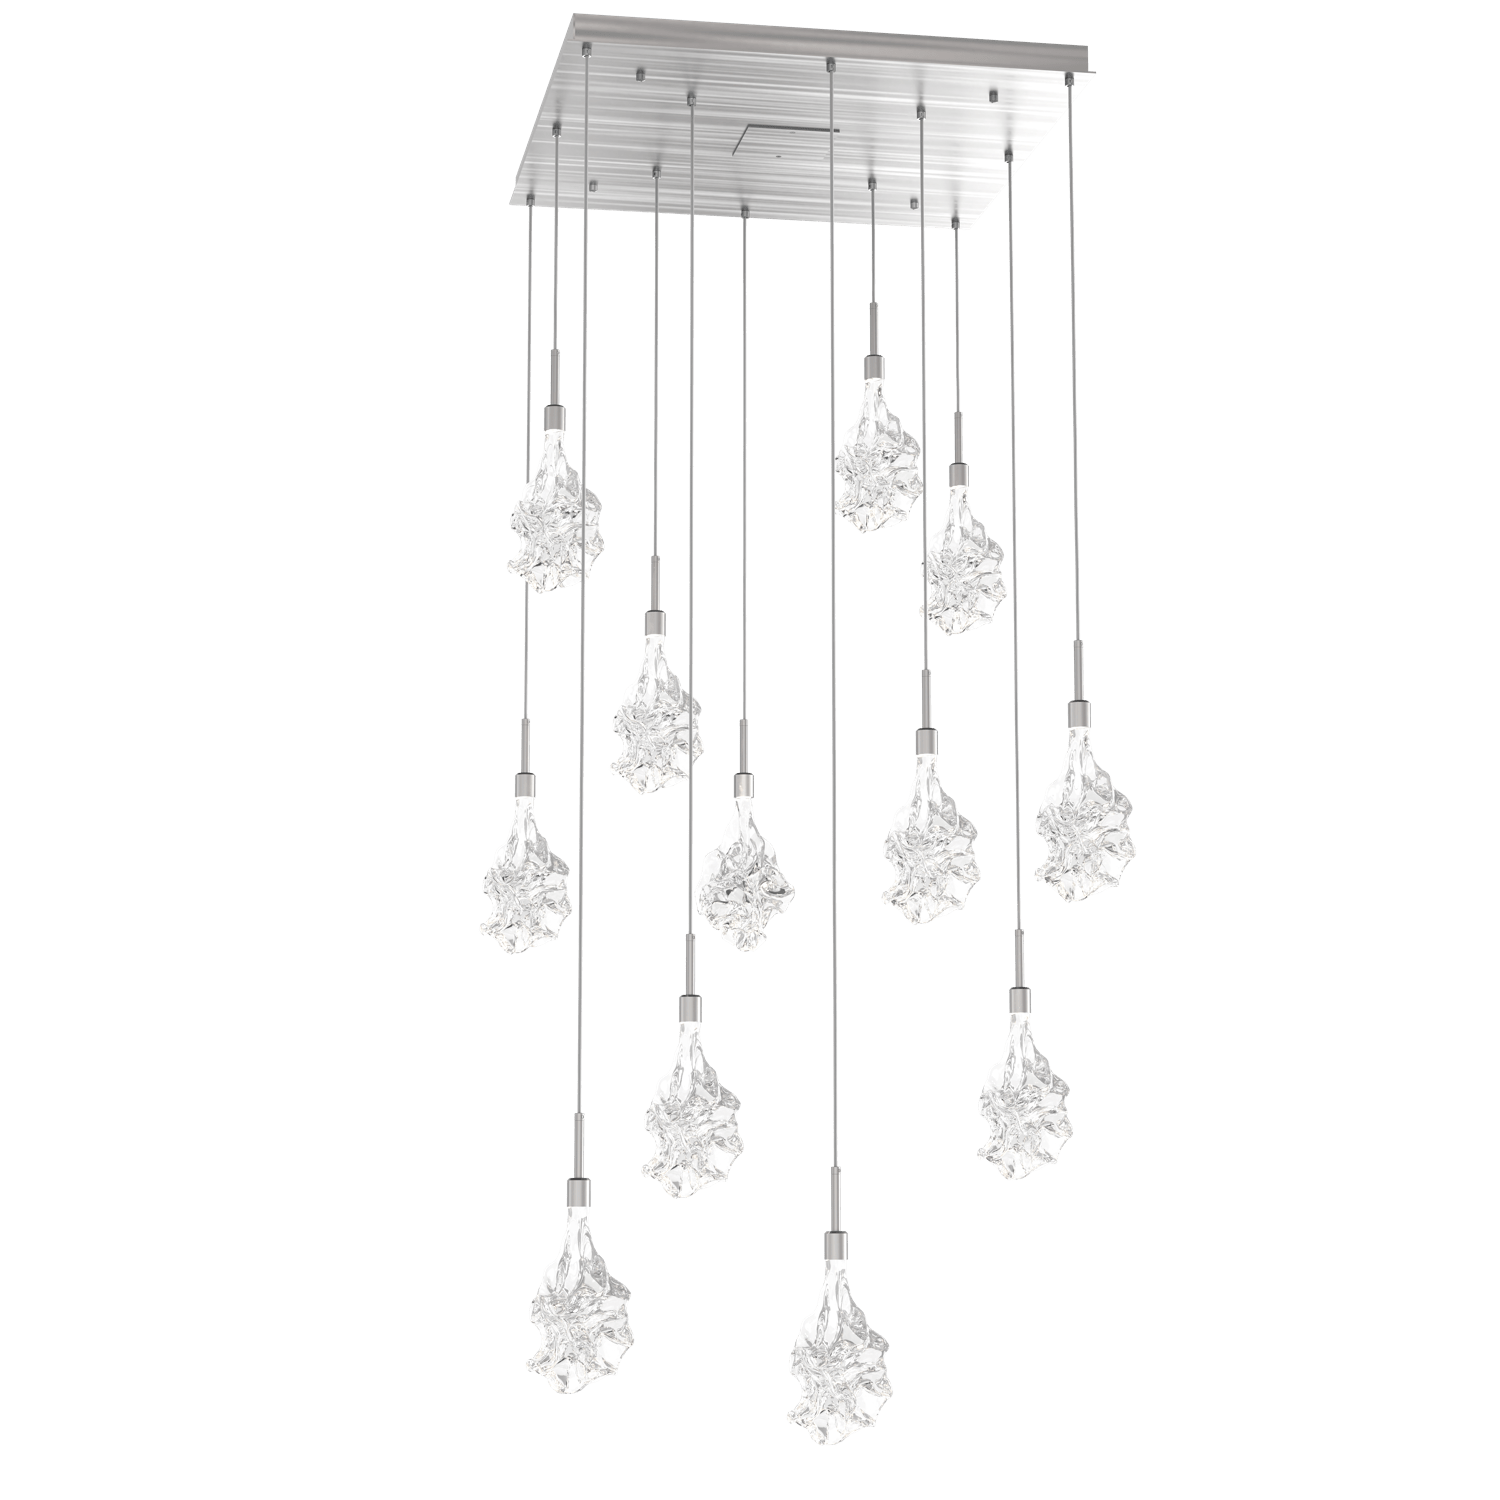 CHB0059-12-SN-Hammerton-Studio-Blossom-12-light-square-pendant-chandelier-with-satin-nickel-finish-and-clear-handblown-crystal-glass-shades-and-LED-lamping